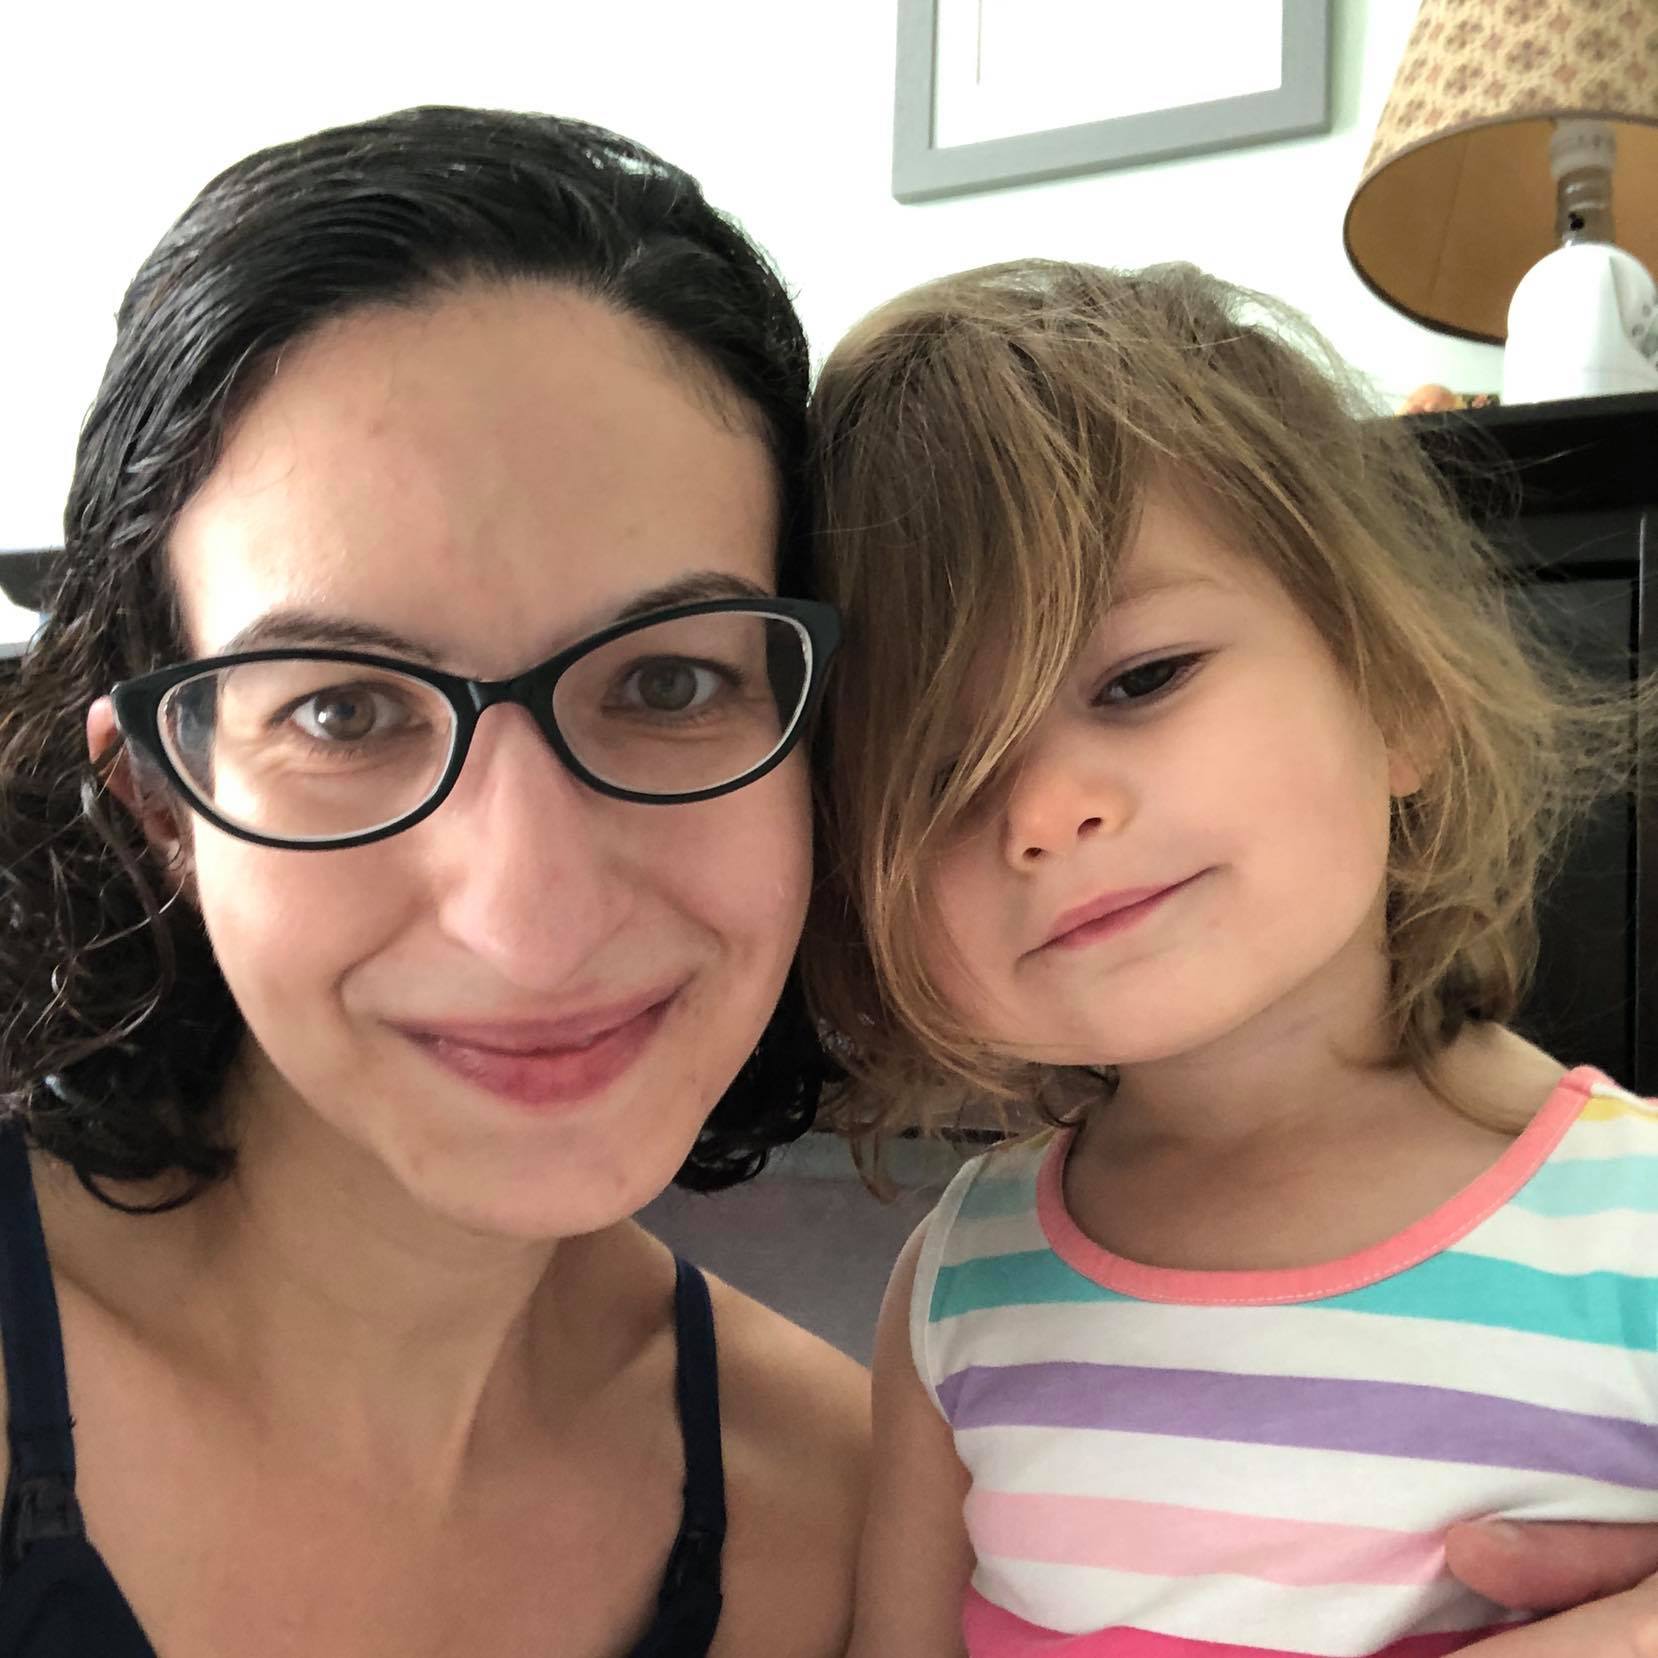 A close-up selfie of Joni, a white woman with dark curly hair and glasses, and her 2-year old daughter, a young white girl with short wavy dark blonde hair.